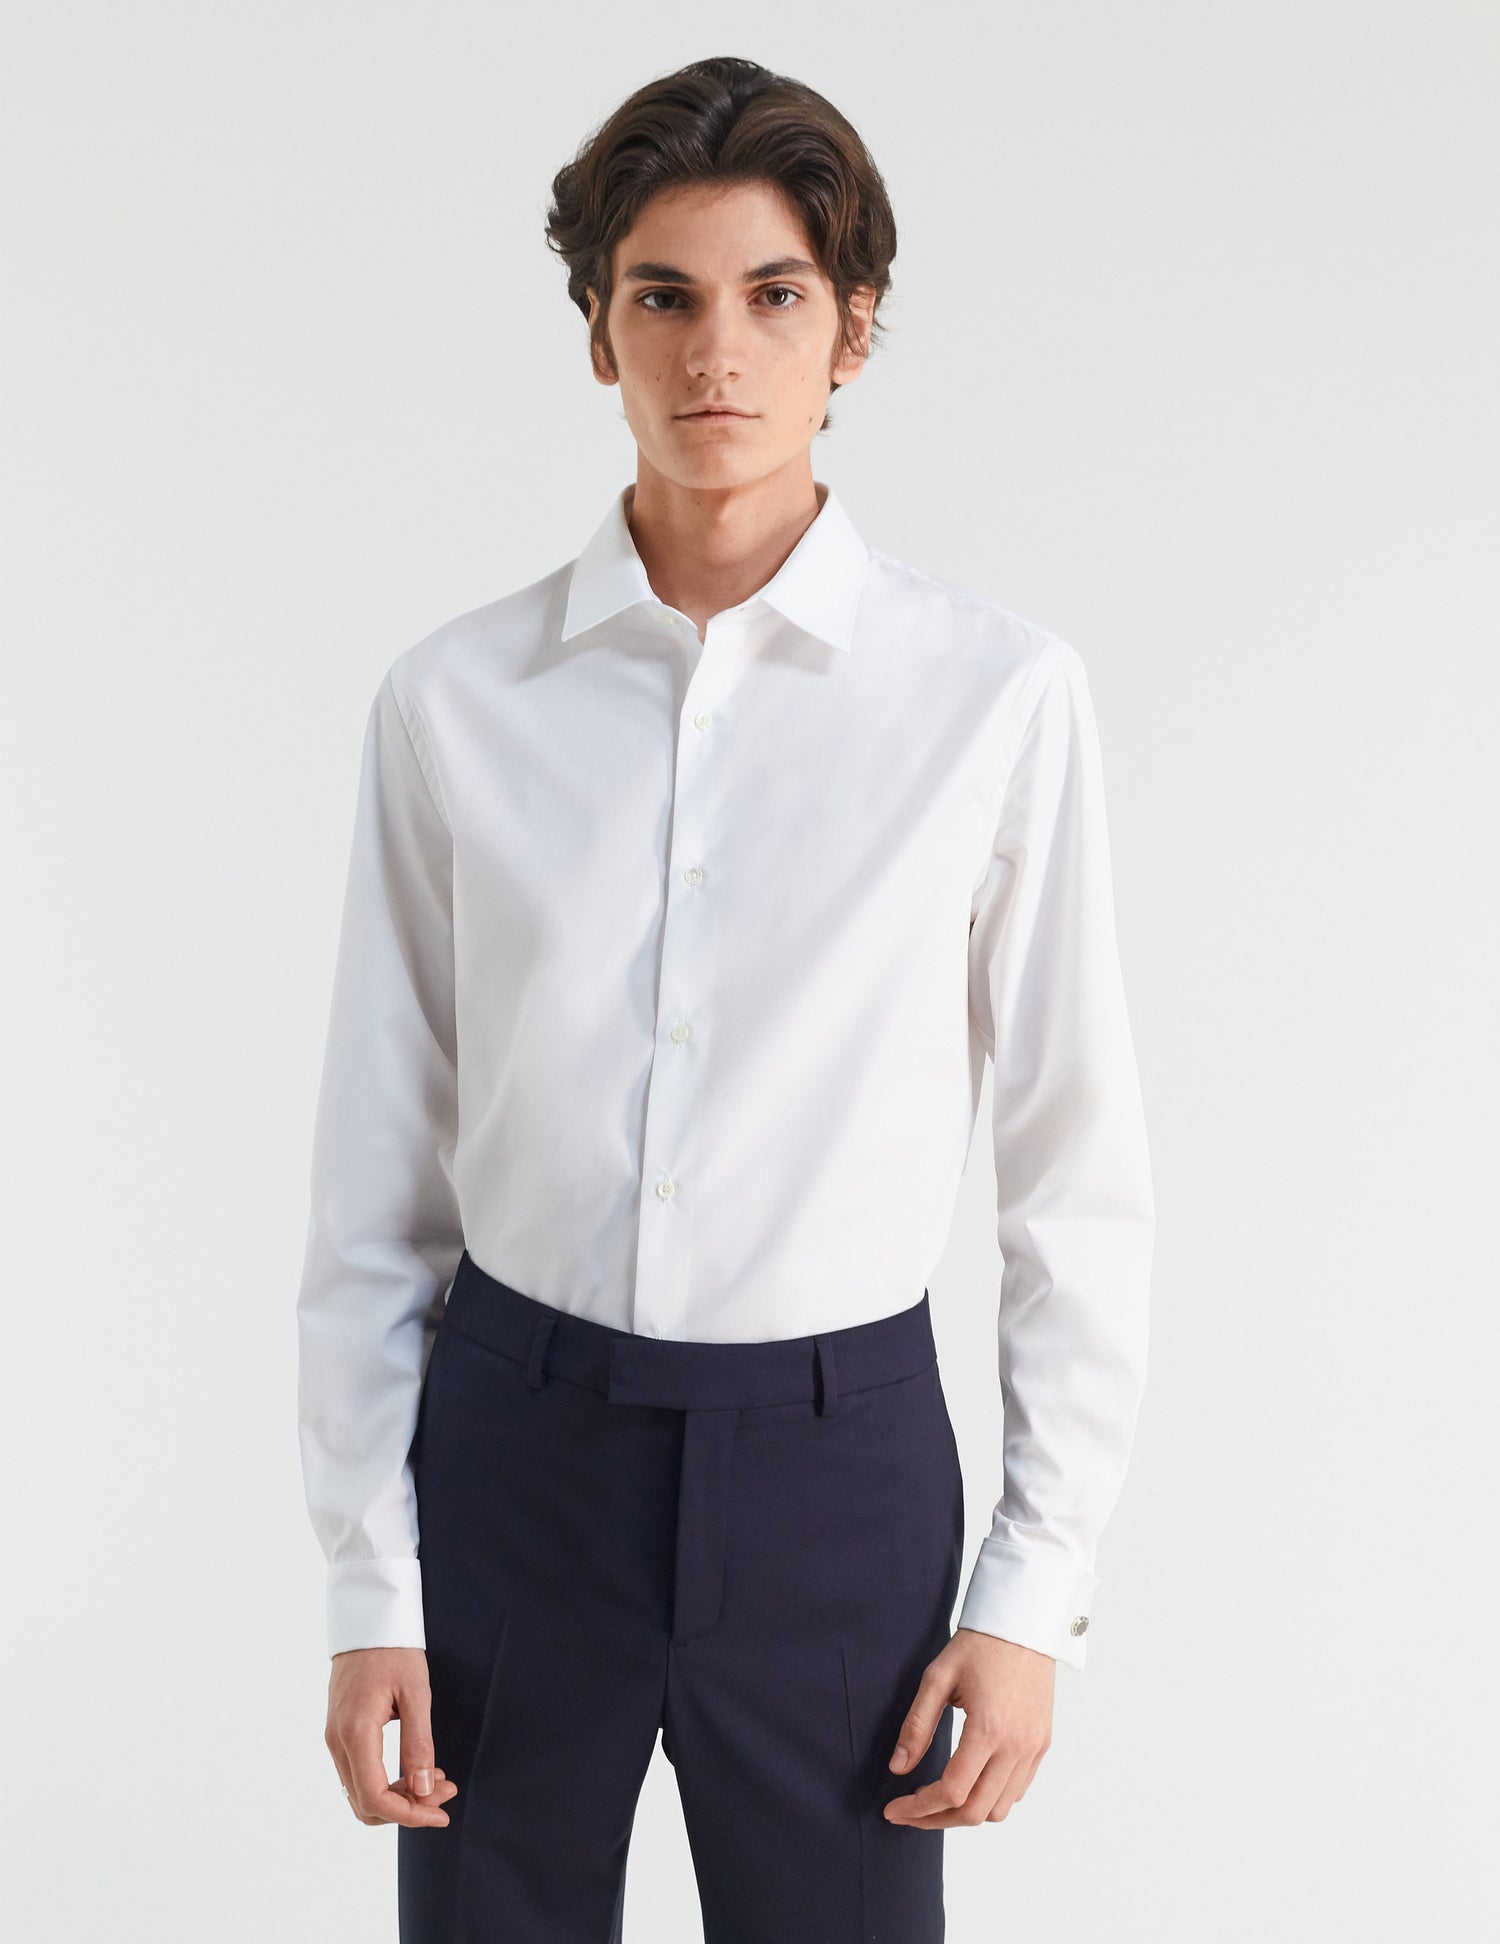 Fitted white shirt - Poplin - Figaret Collar - French Cuffs#3